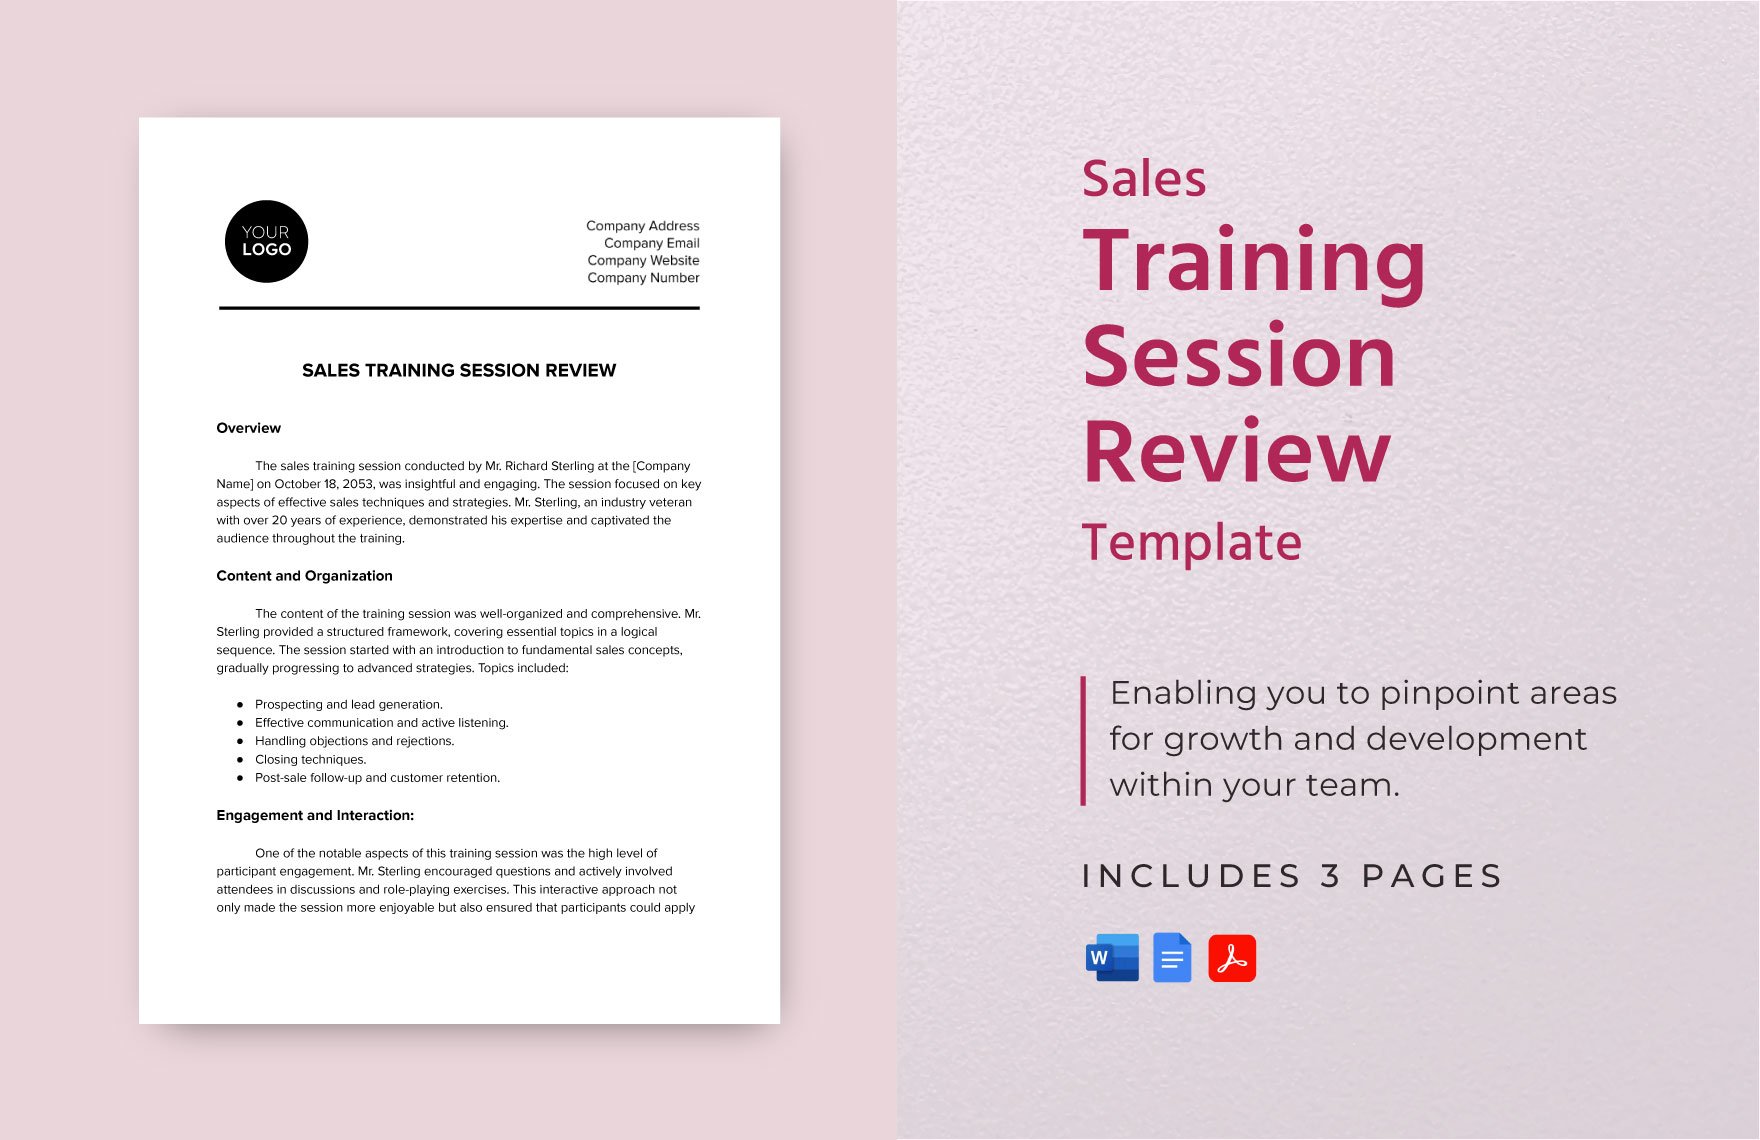 Sales Training Session Review Template in Word, Google Docs, PDF